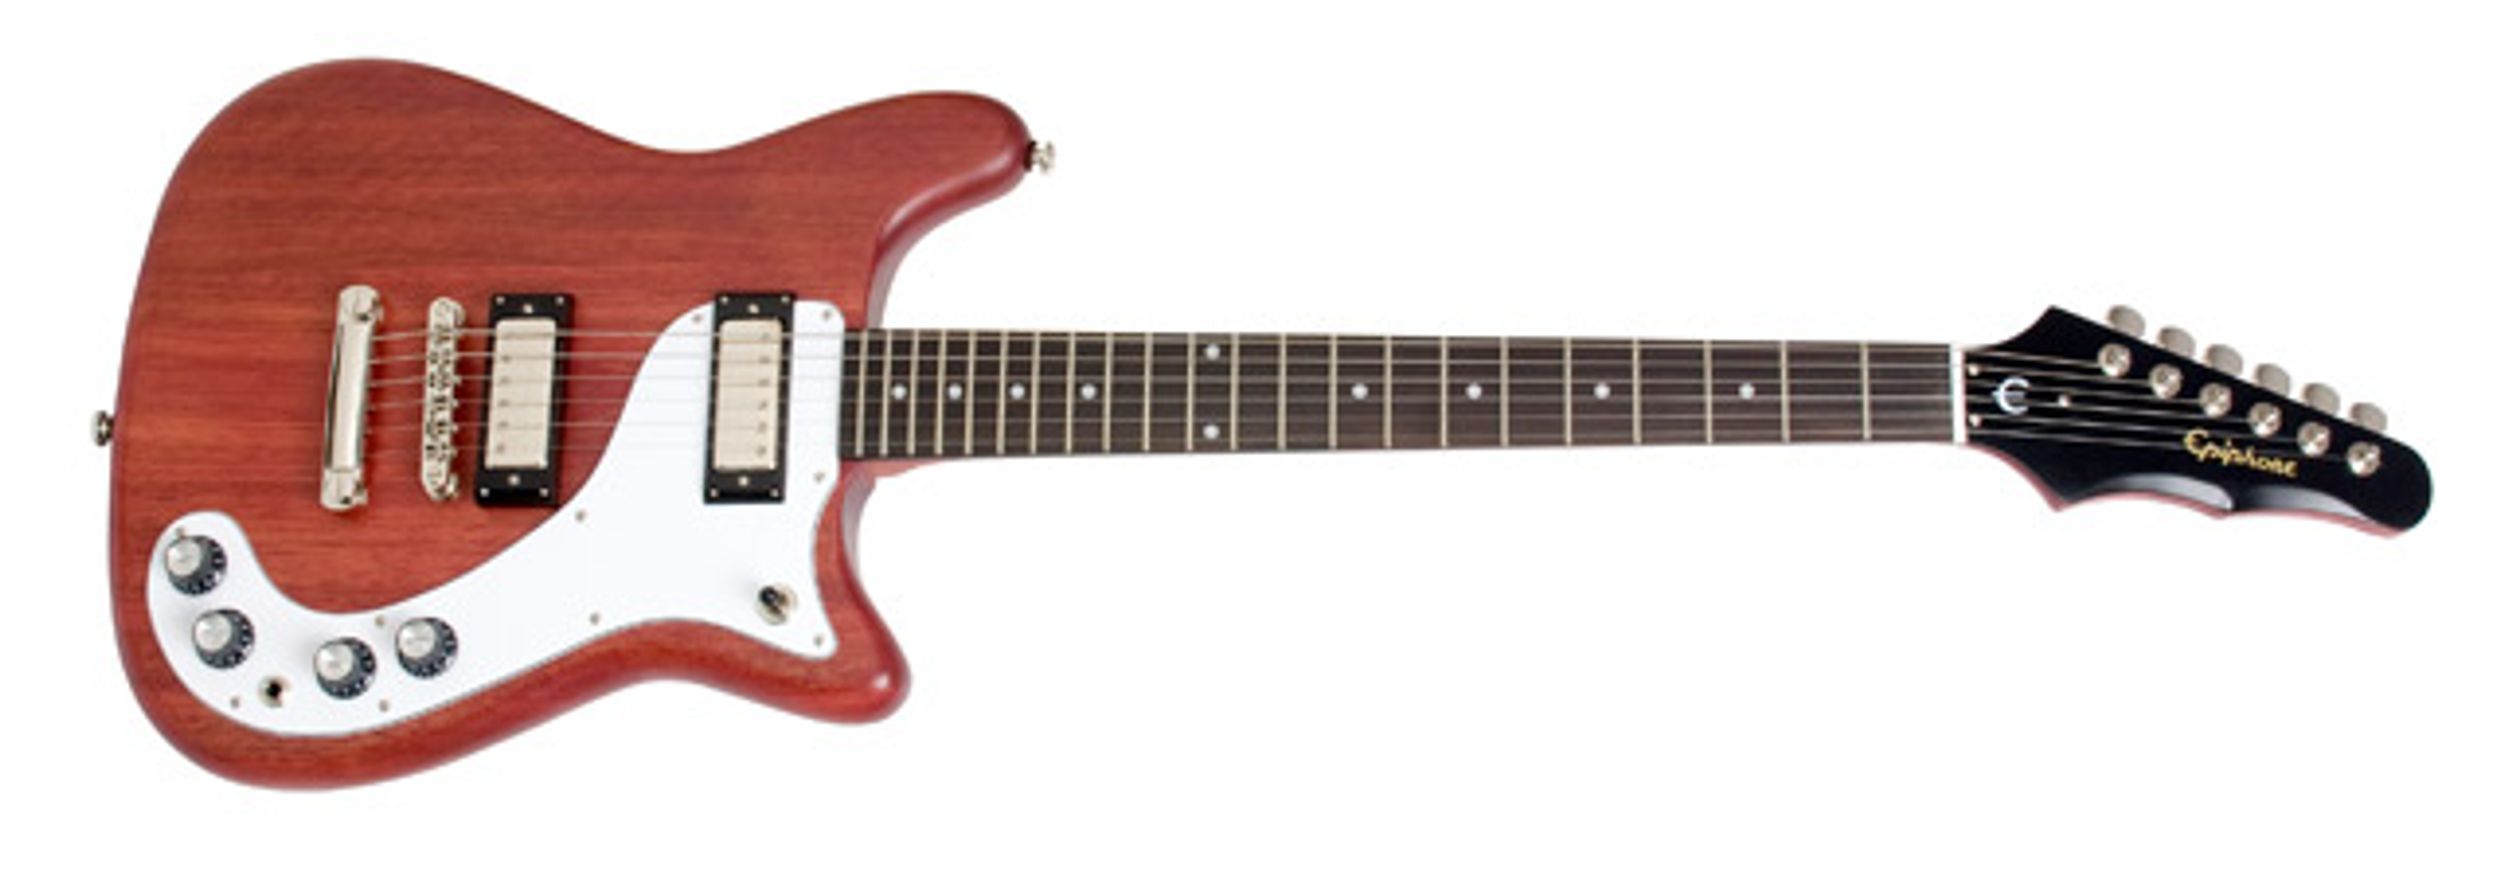 Epiphone Worn 1966 Wilshire Electric Guitar Review 